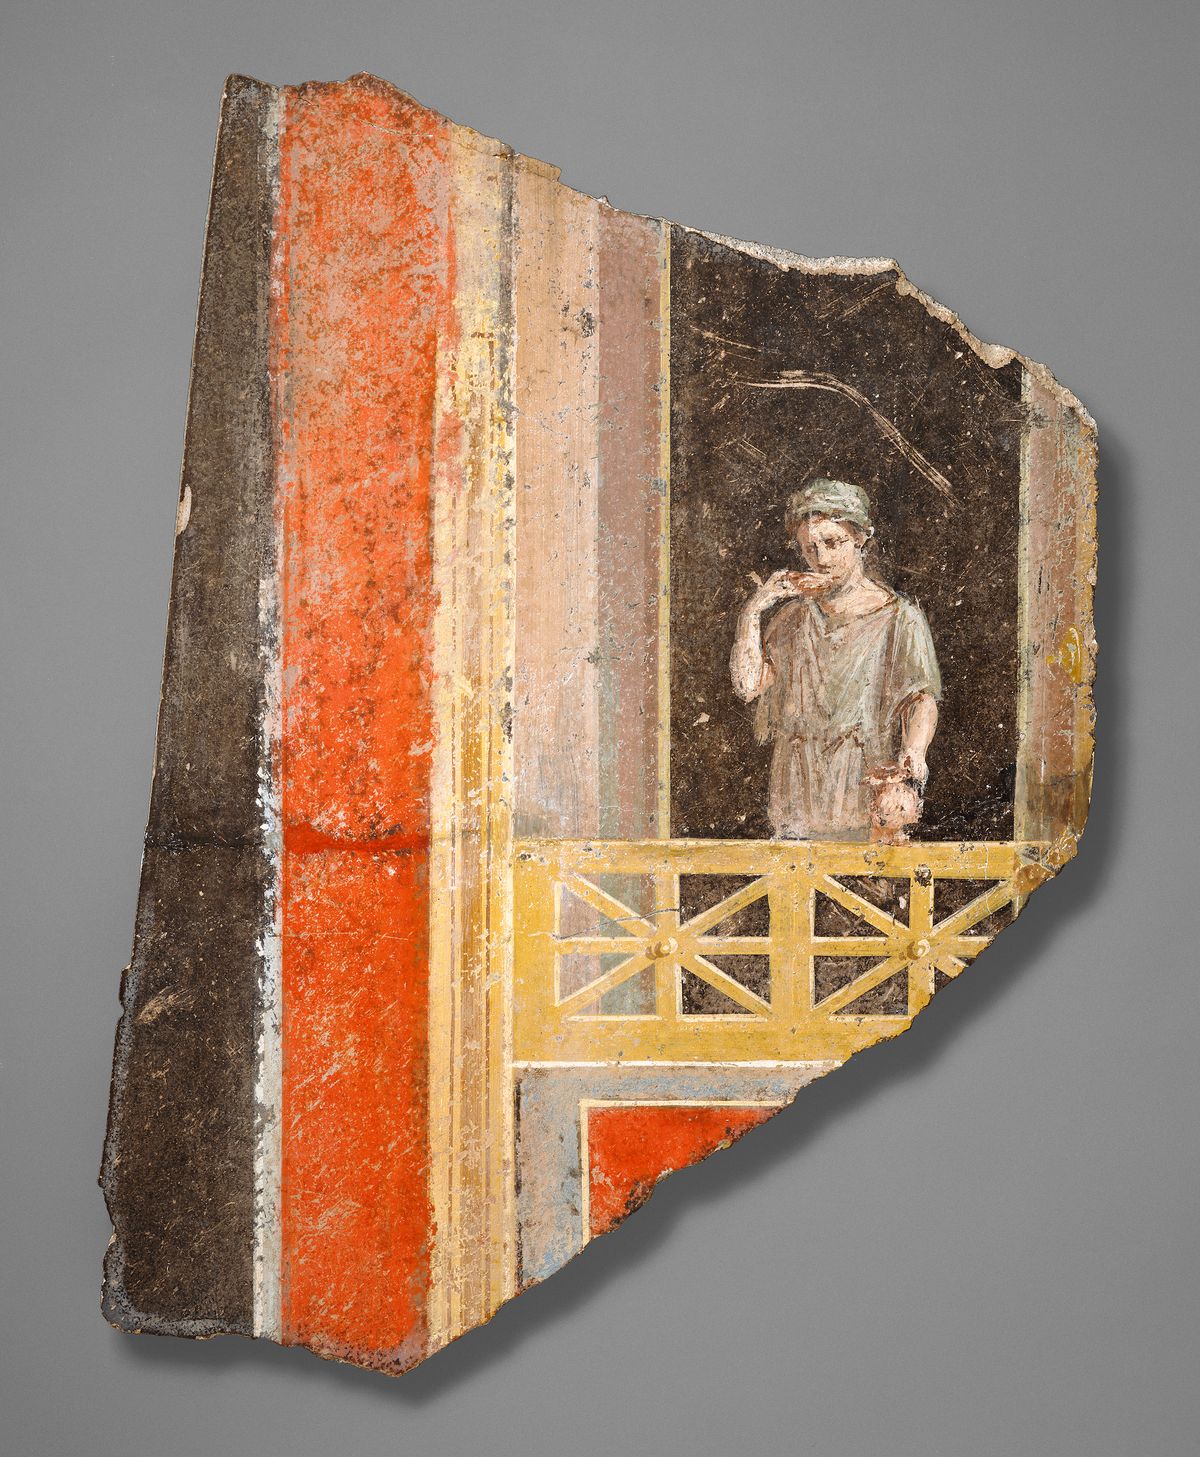 Unknown artist, Fresco Fragment: Woman on a Balcony, 10BC-AD14 
The J. Paul Getty Museum, Villa Collection, Malibu, California, Gift of Barbara and Lawrence Fleischman